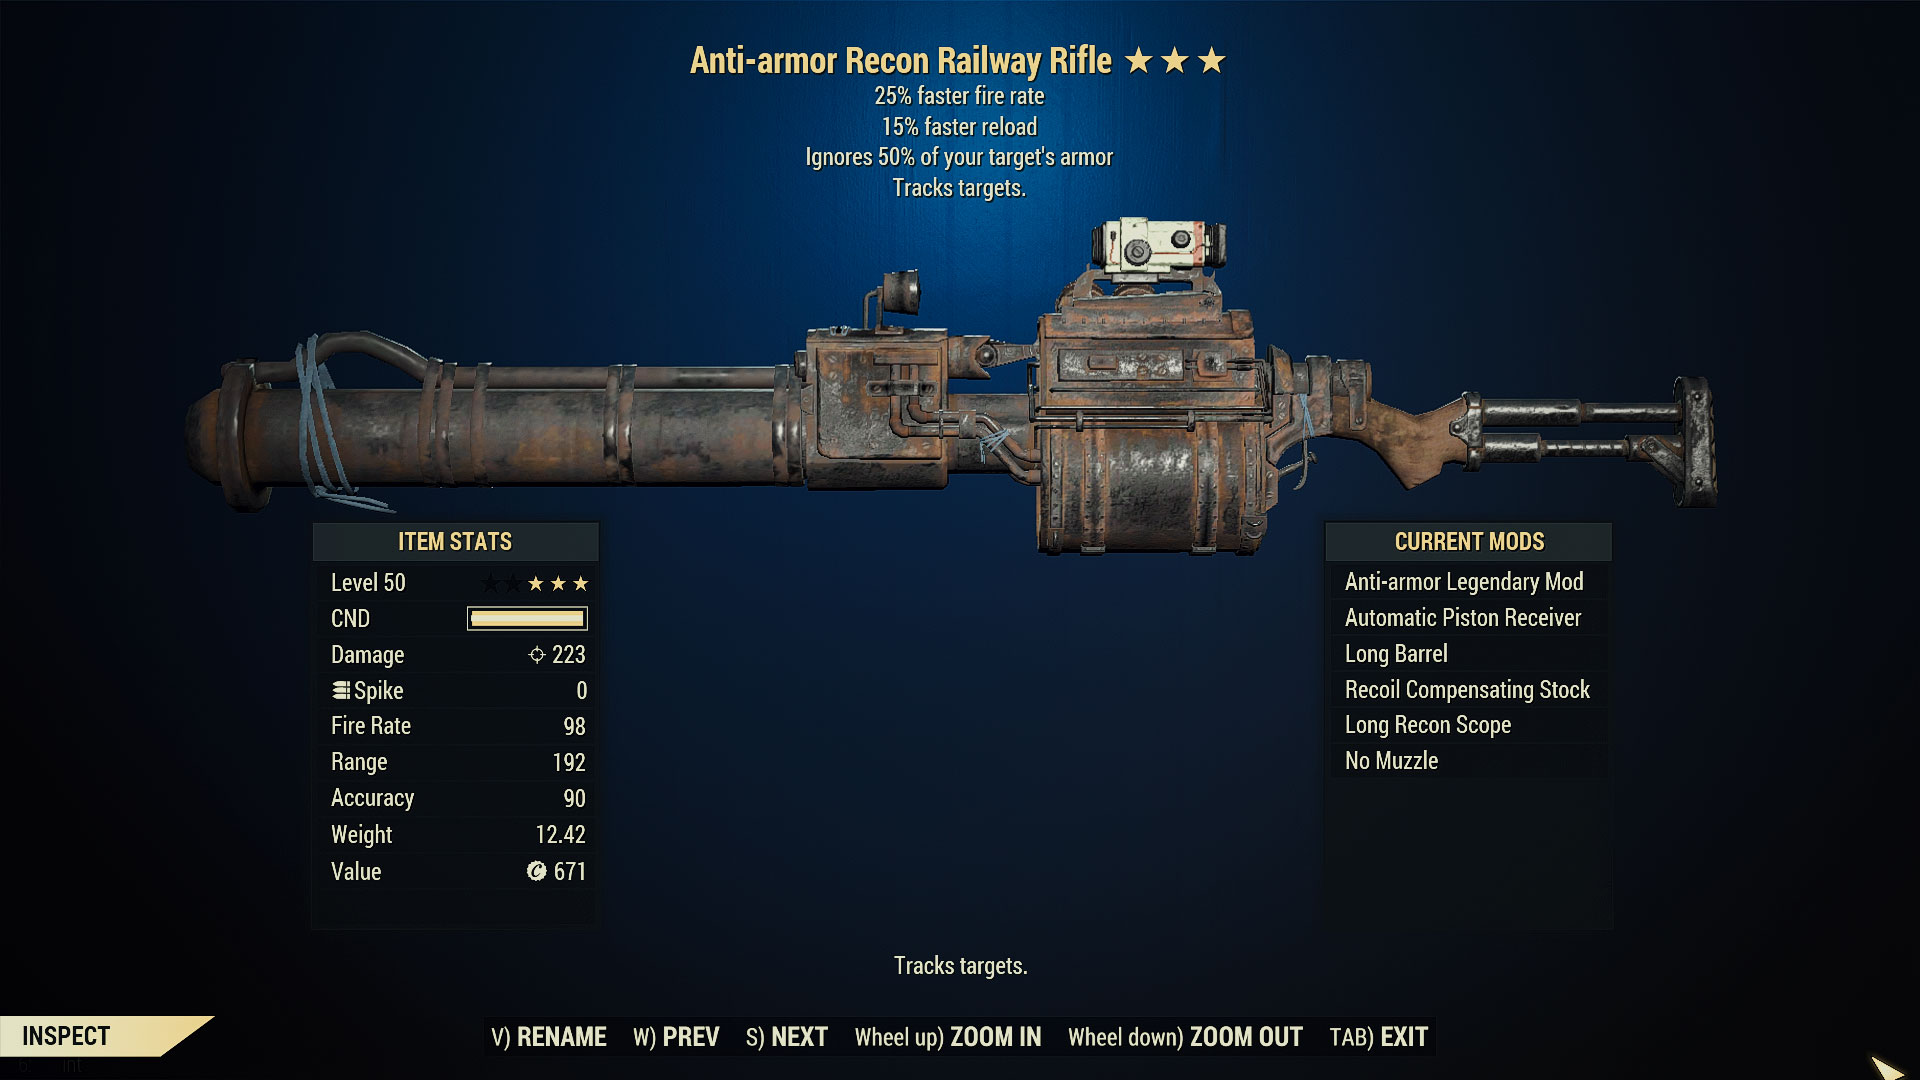 Anti-armor Railway Rifle (25% faster fire rate/15% faster reload)